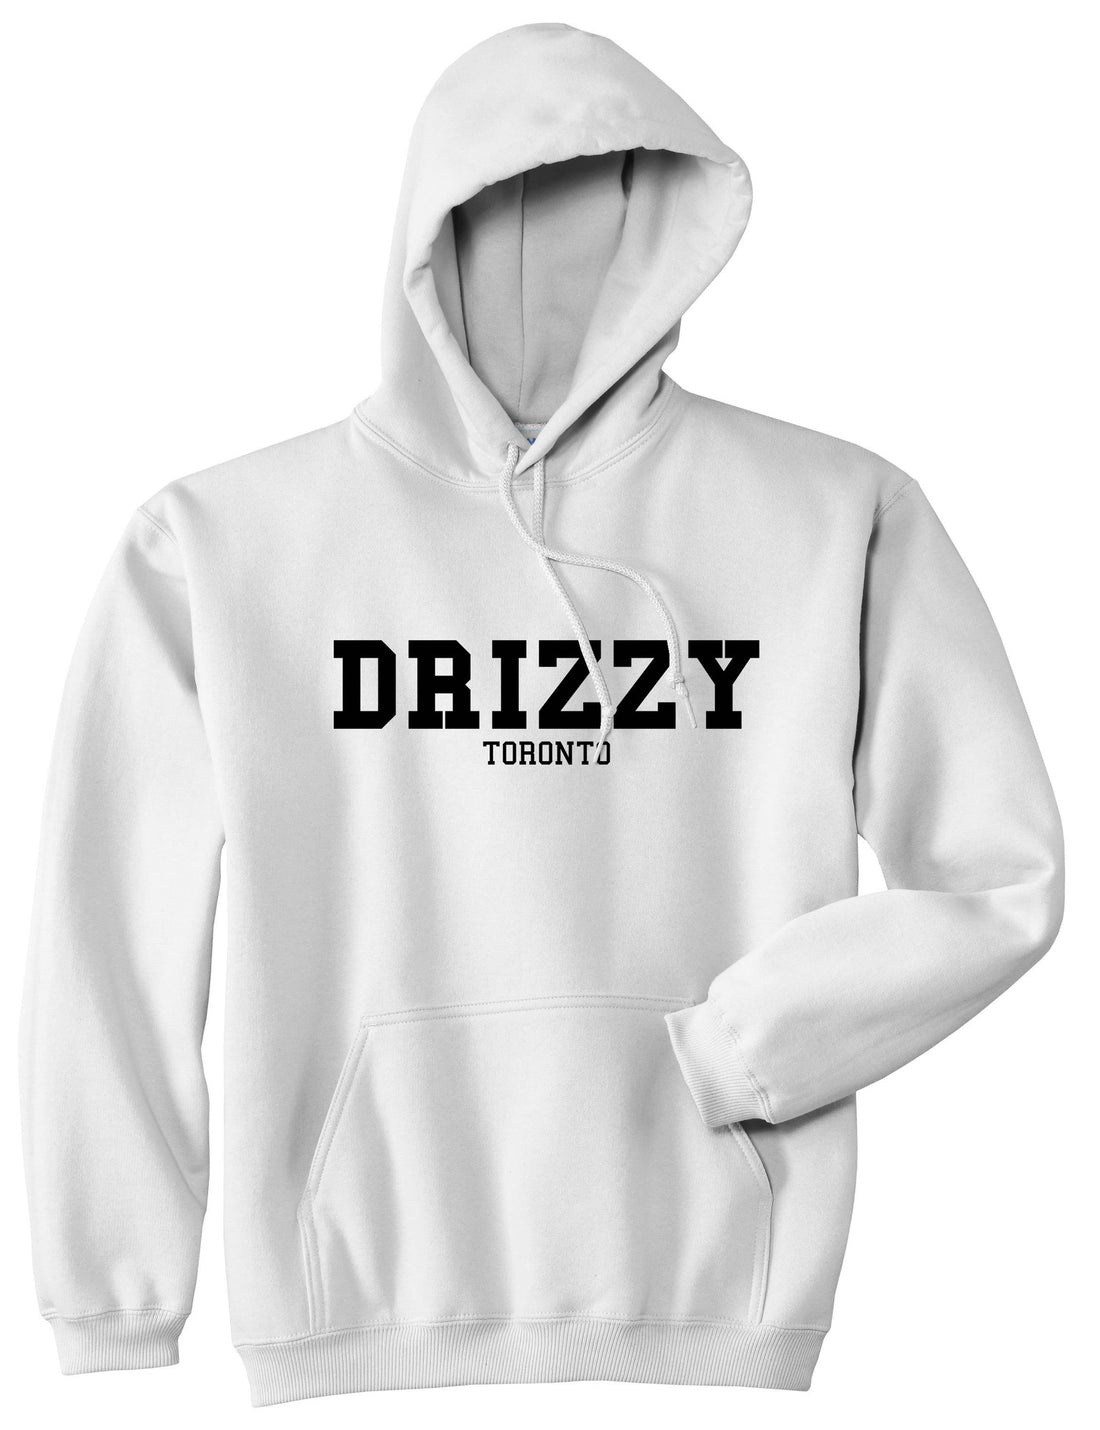 Drizzy Toronto Canada Pullover Hoodie Hoody in White by Kings Of NY